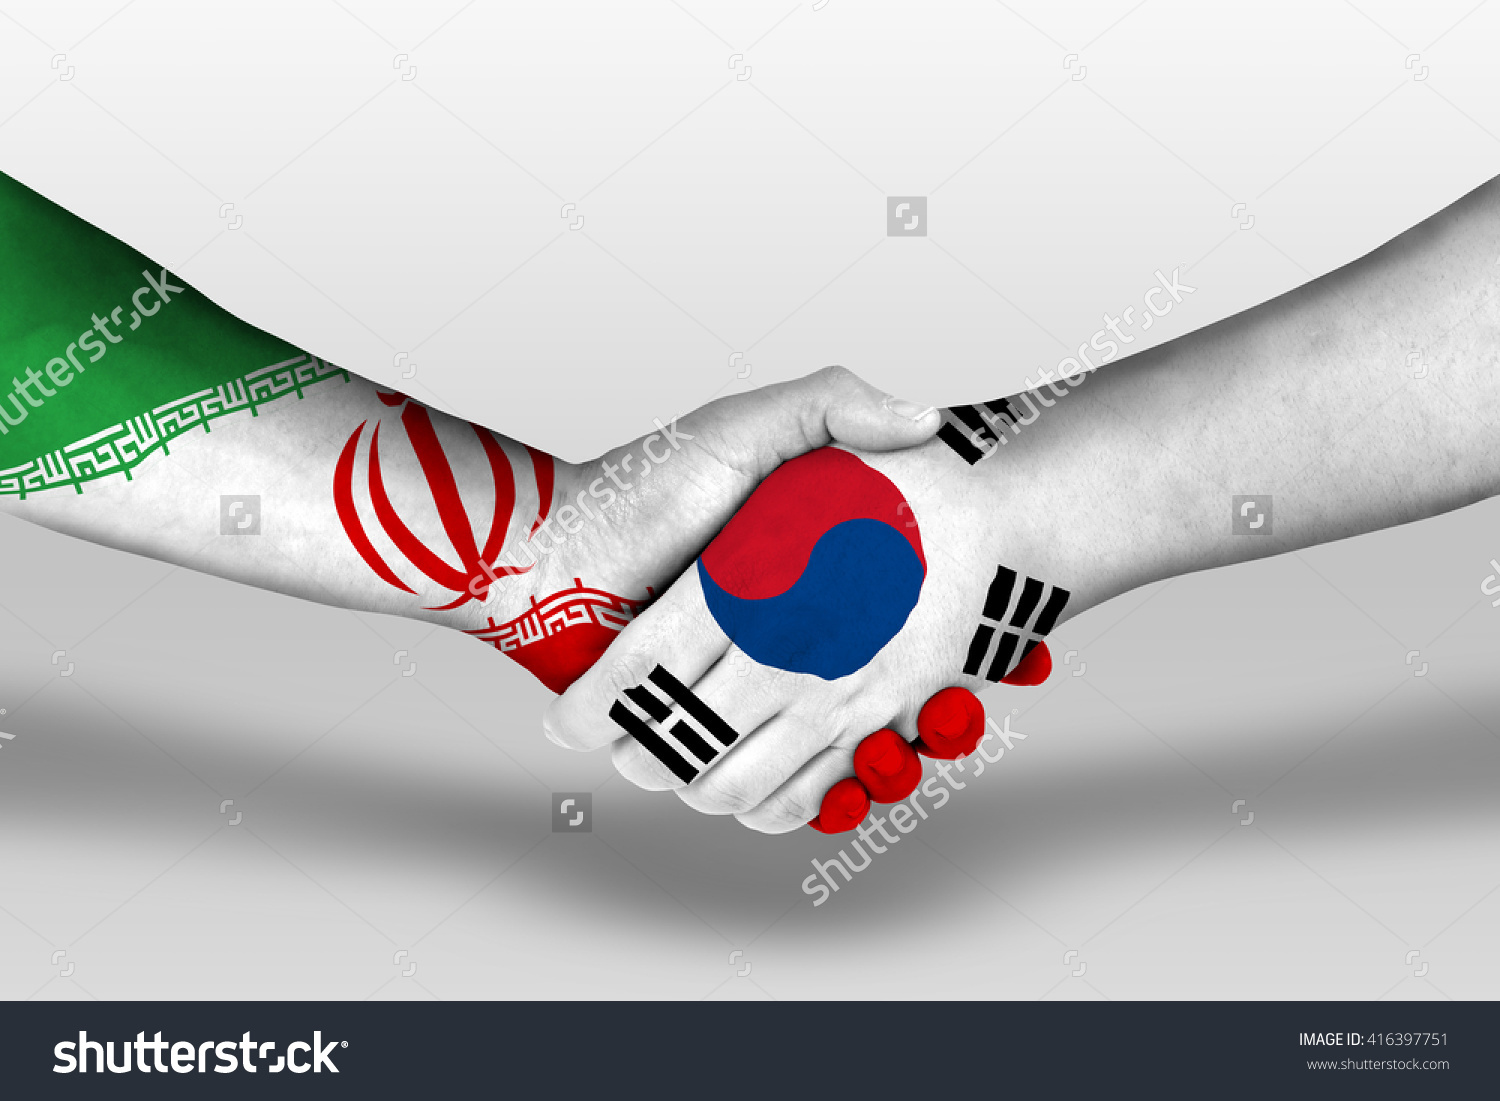 South Korean company ready for cooperation with Iranian partners